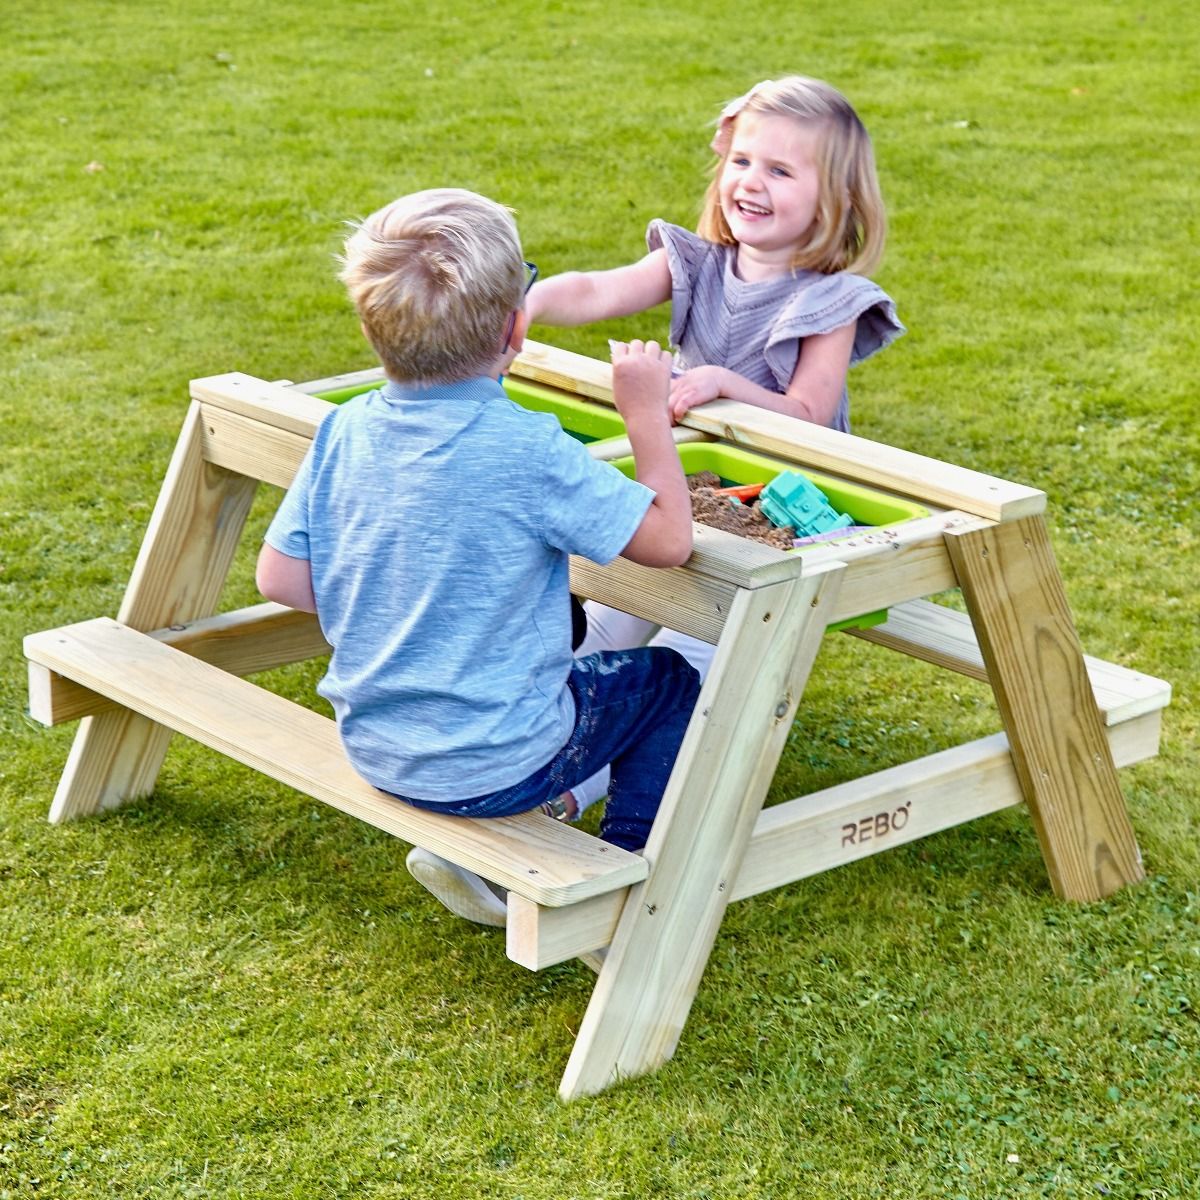 Rebo Wooden Sandpit With Lid Sand & Water Picnic Table Play Bench – Double